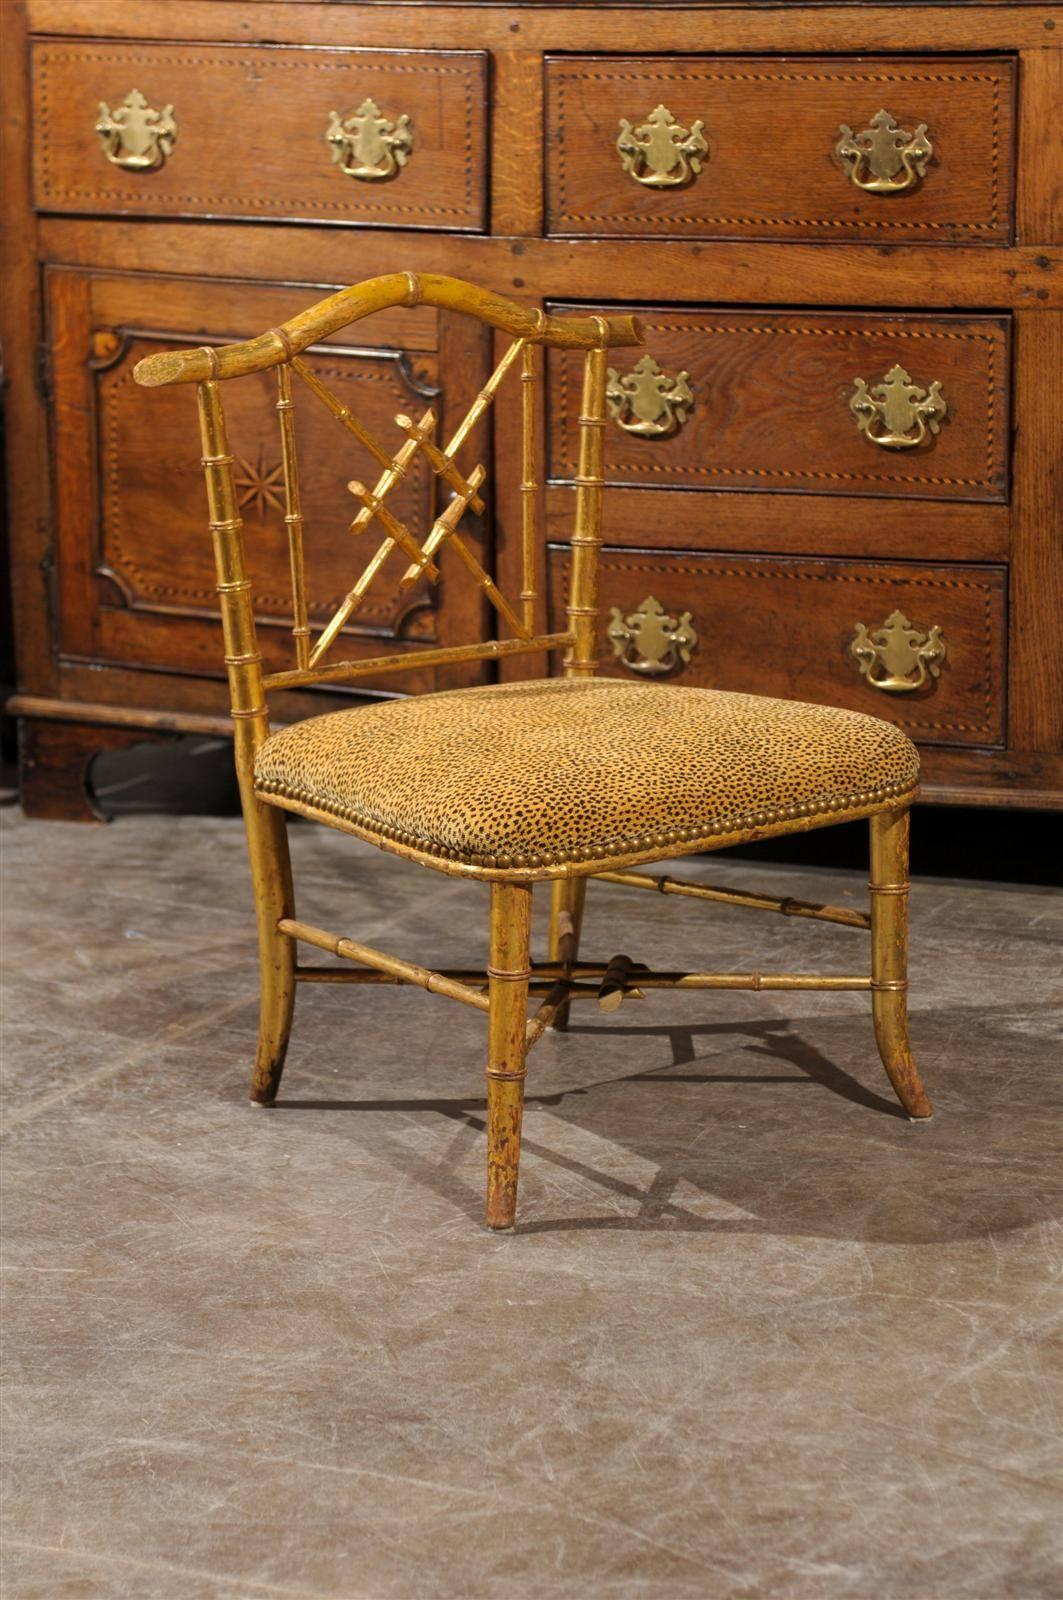 This French Chinese Chippendale style stool with back is from the mid 20th century and features a giltwood faux-bamboo armature. The back, made of geometric motifs typical of the Chinese Chippendale style, is topped with a slightly arched rail. The